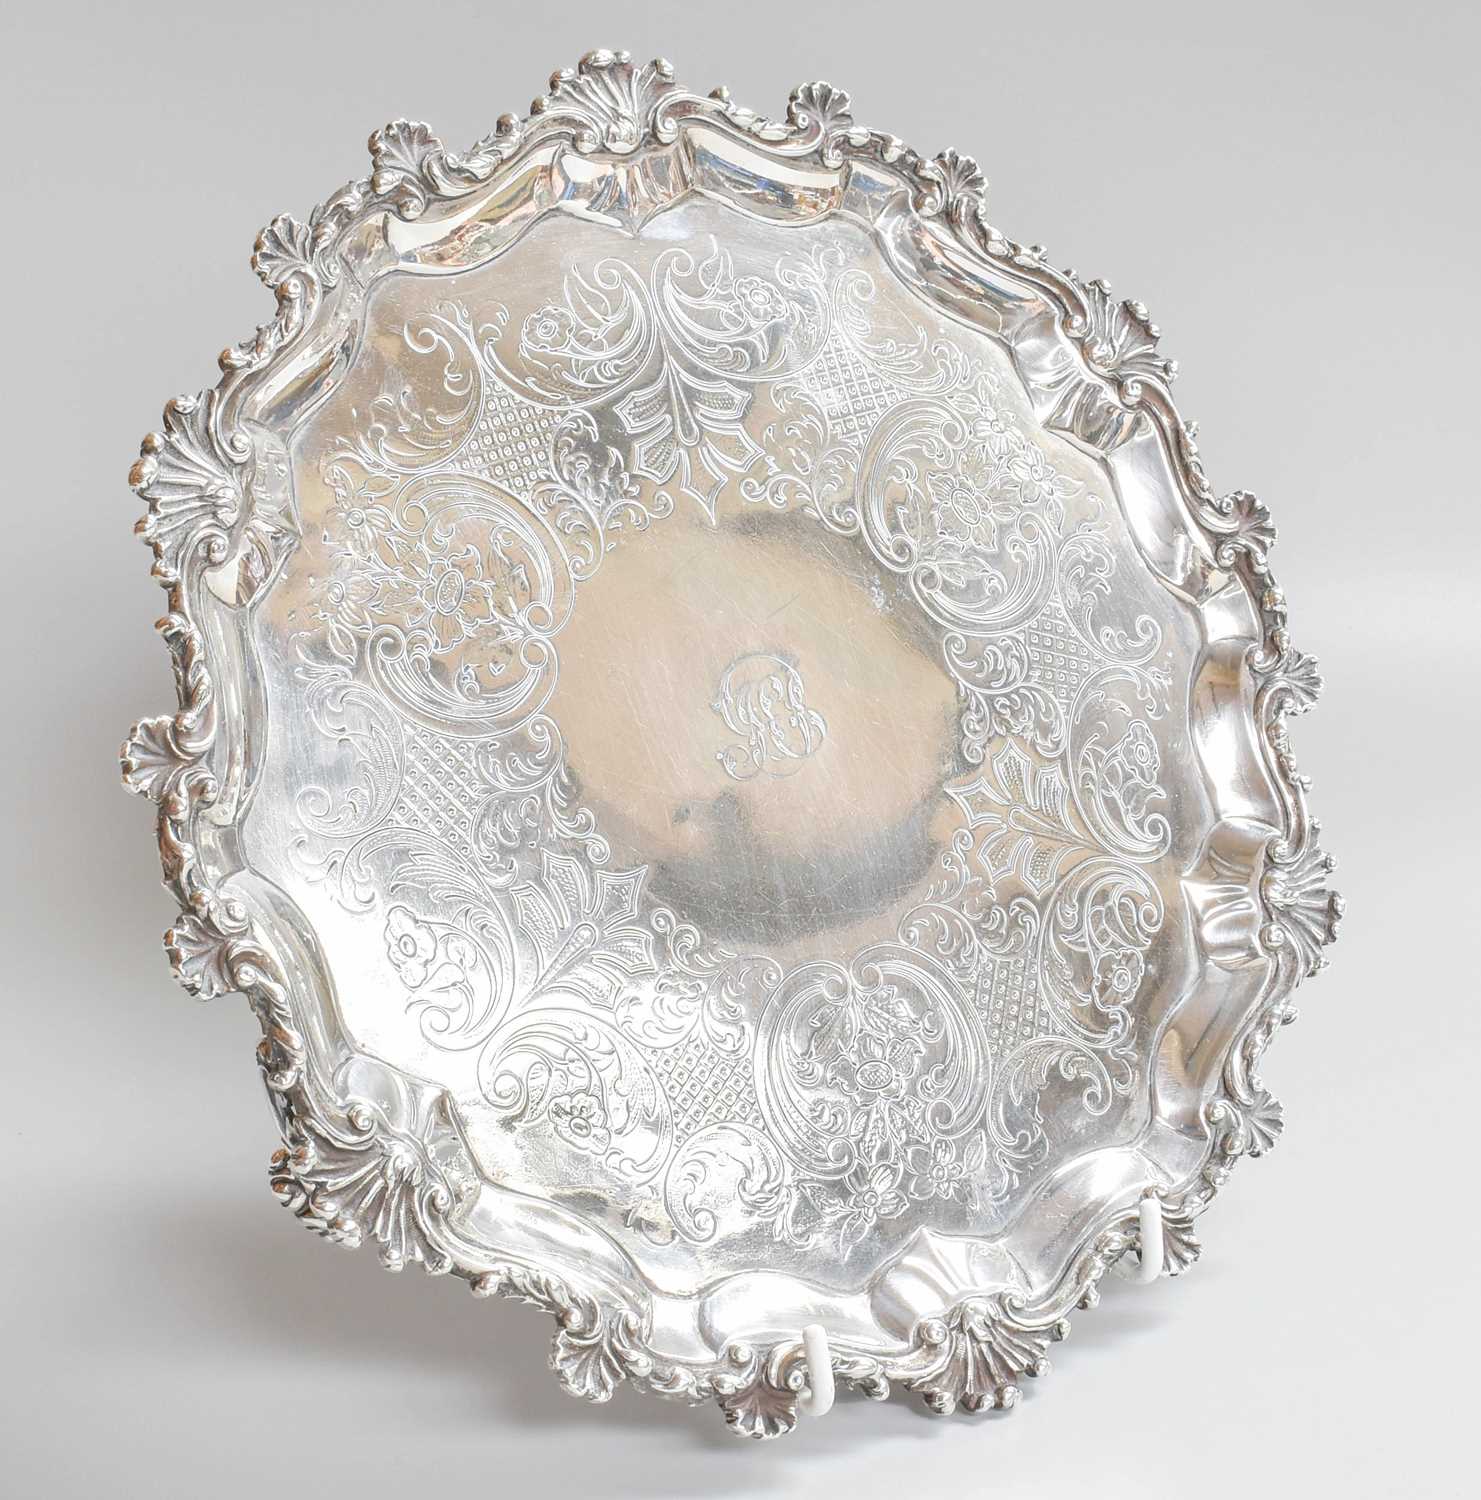 A Victorian Silver Salver, by Samuel Hayne and Dudley Cater, London, 1852, shaped circular and on